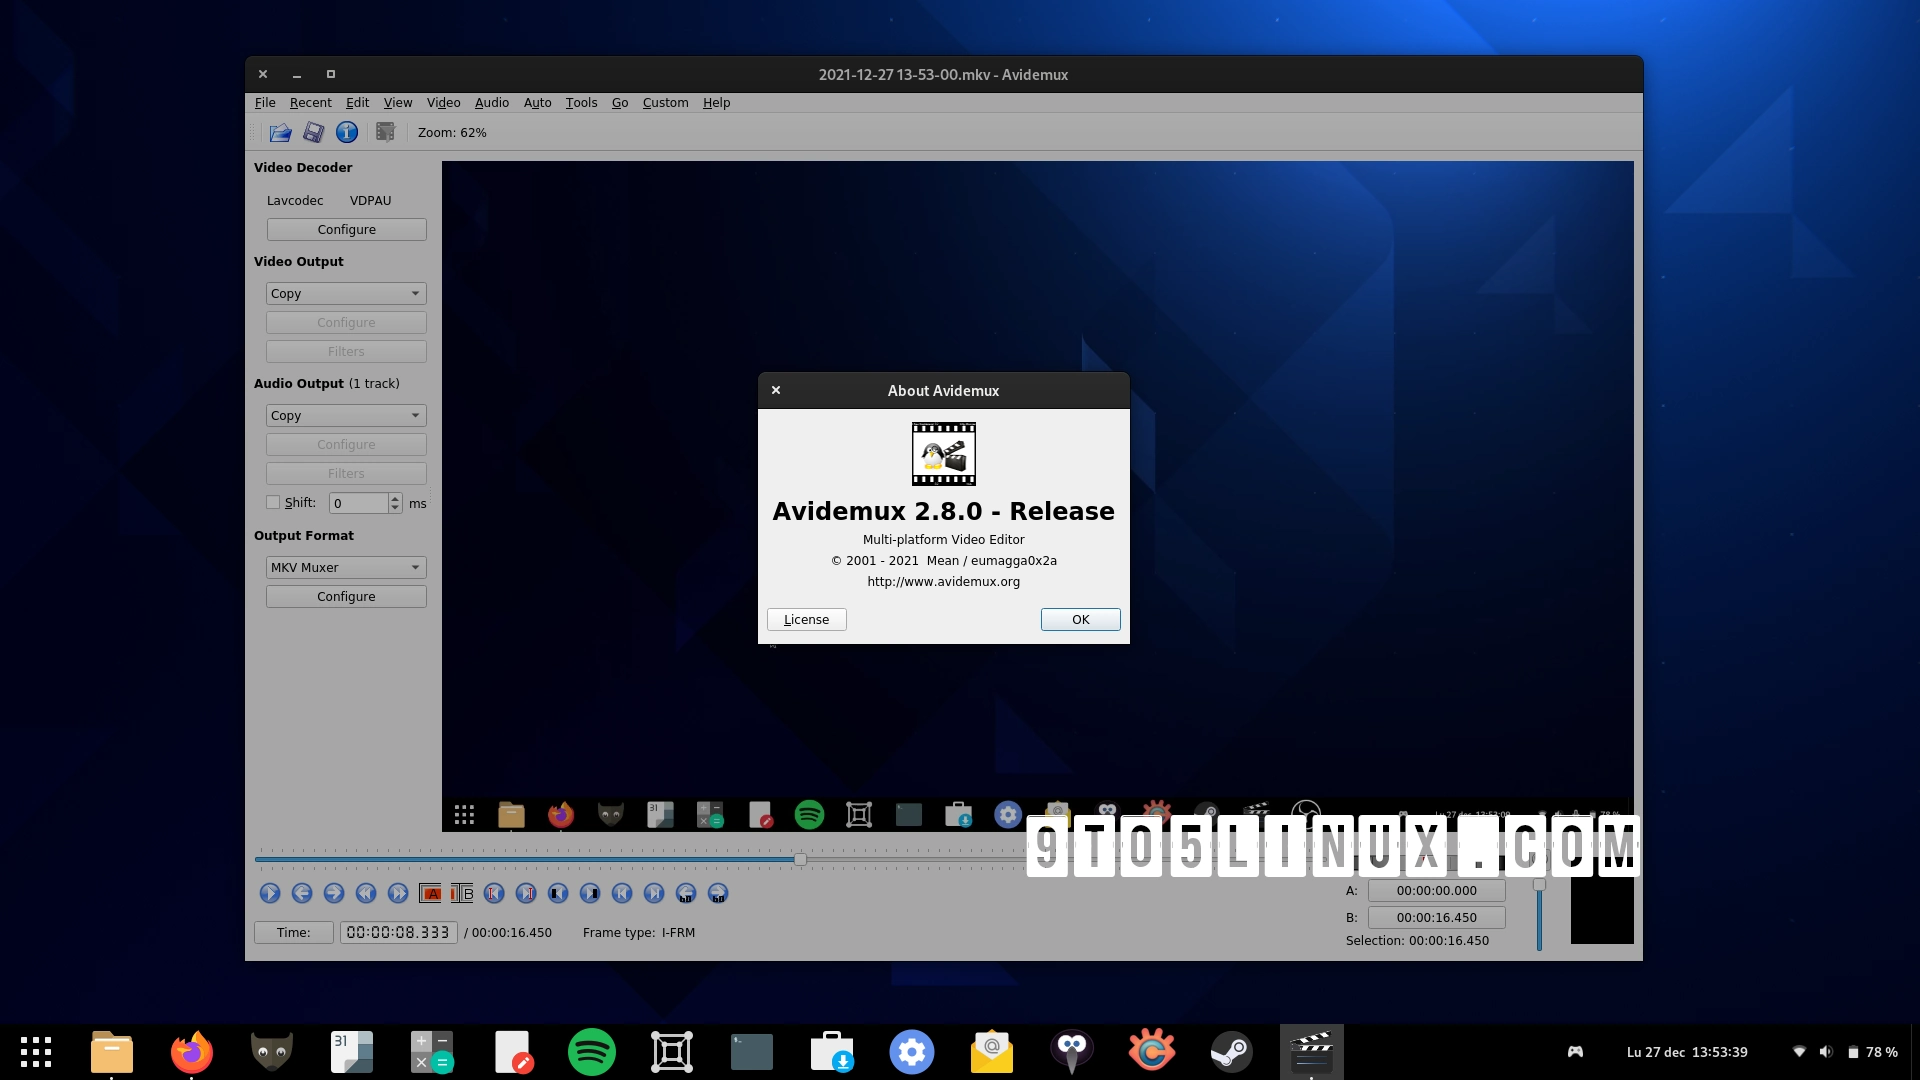 Avidemux 2.8 Released with FFV1 Encoder, WMA9 Lossless and TrueHD Decoding